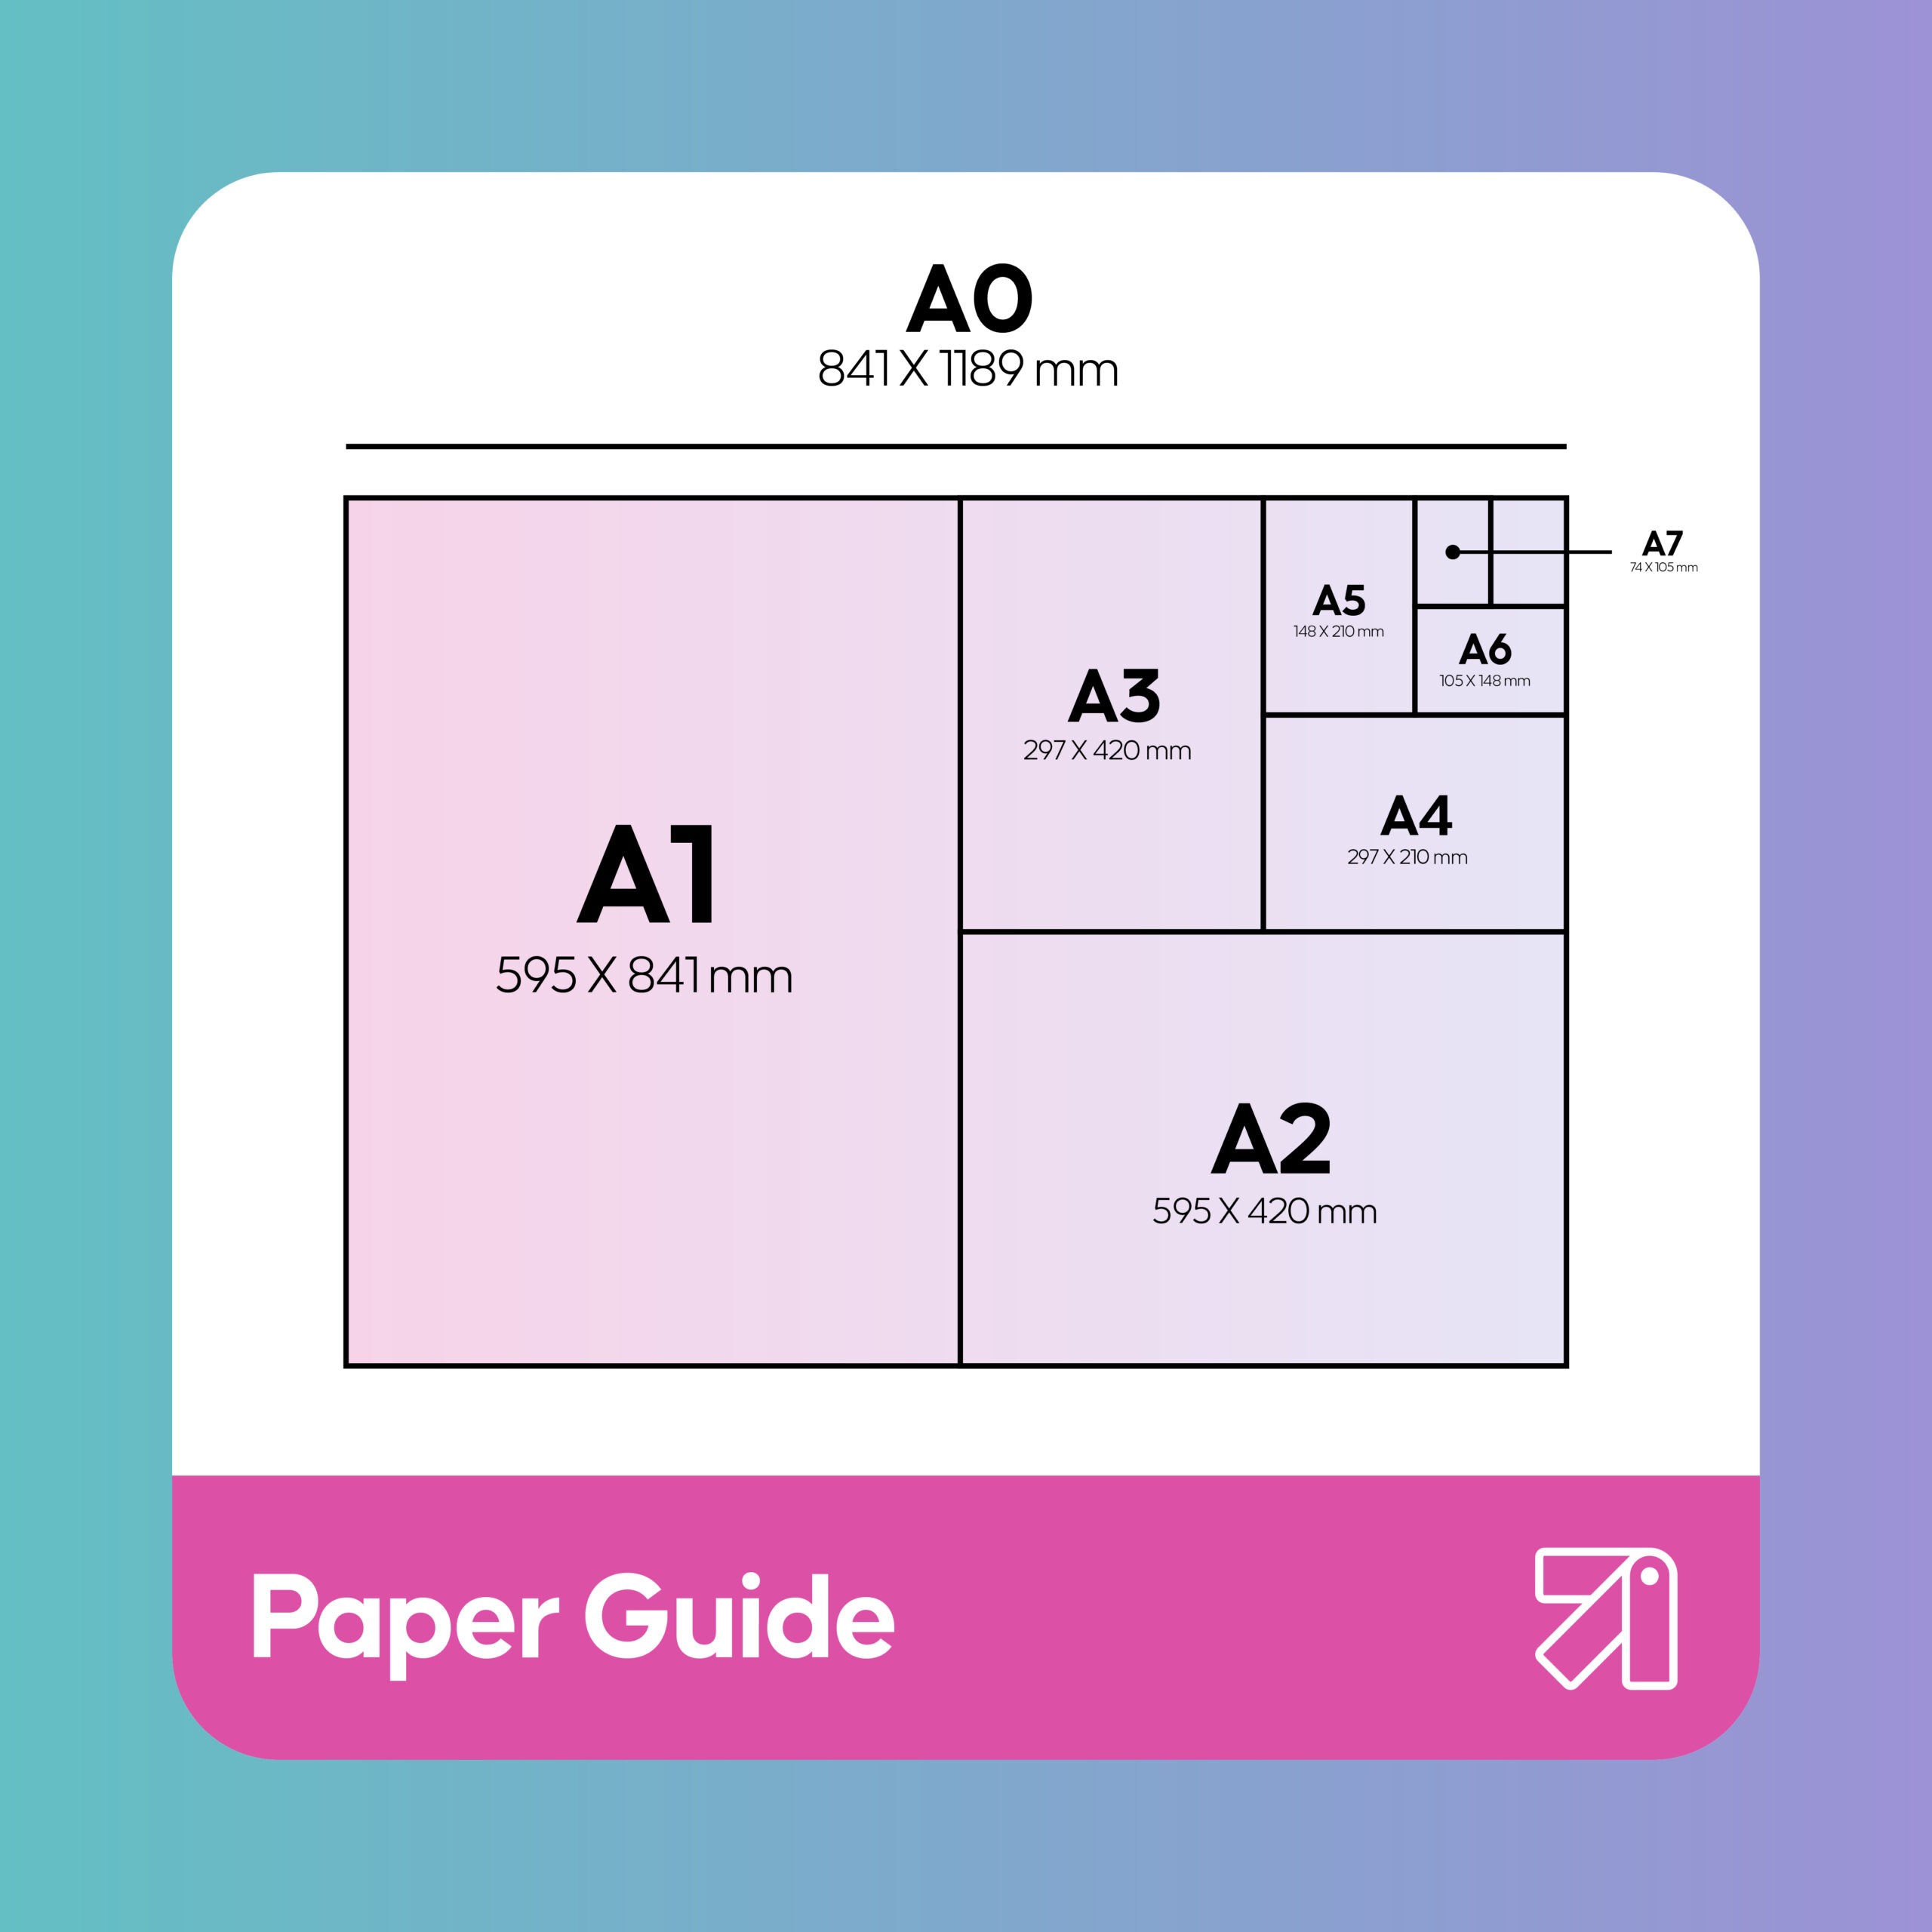 A2 Format, A2 Paper Size & Uses, A Series Paper